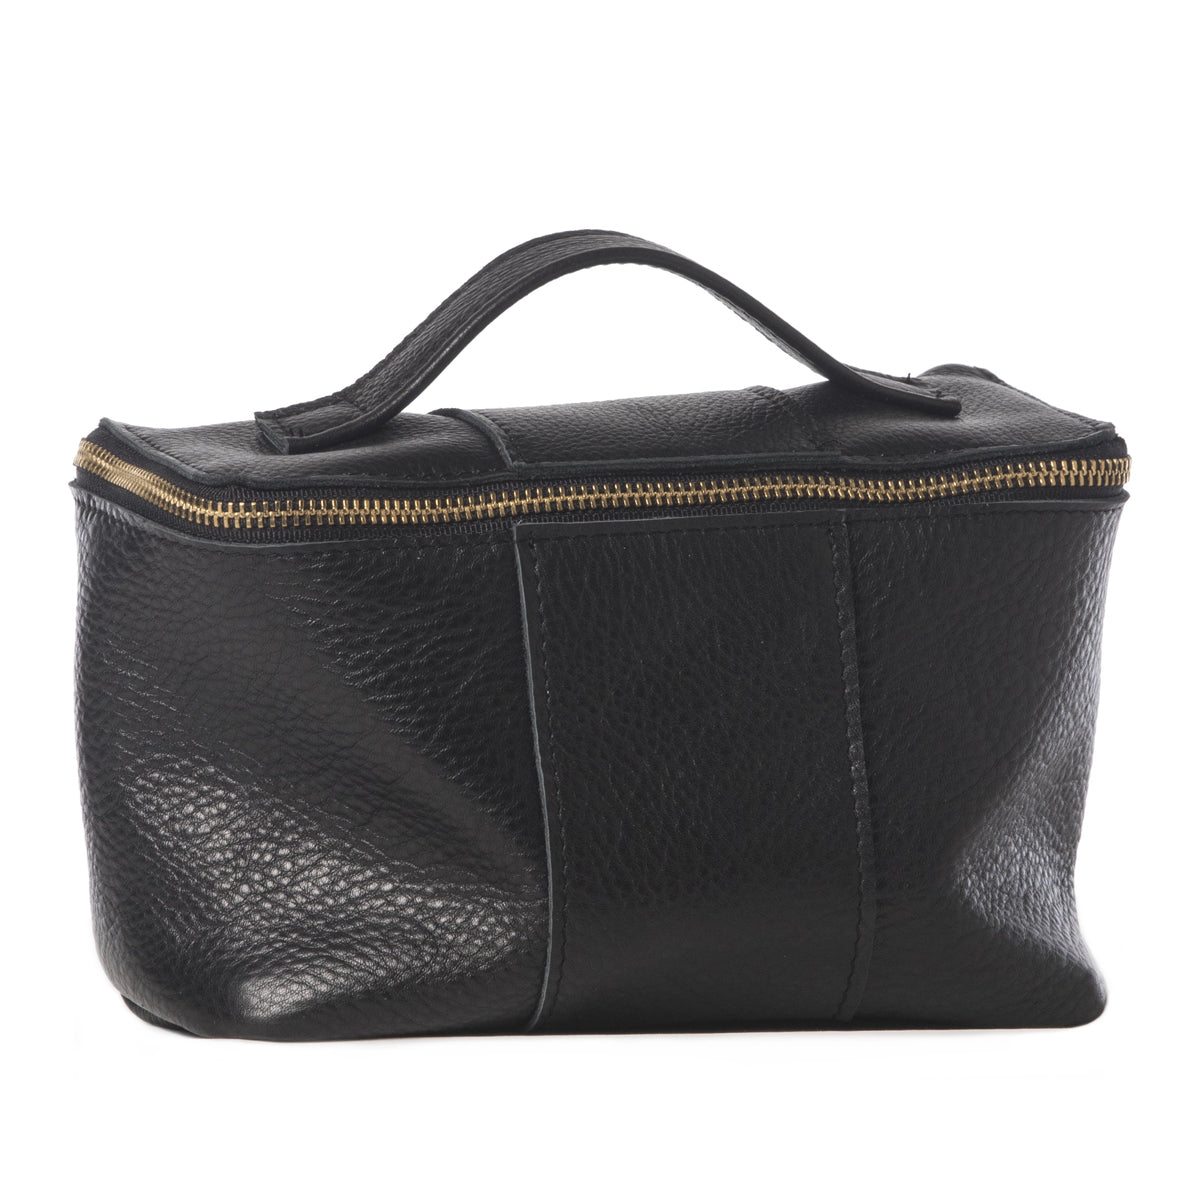 Black leather carry-all bag handmade in the USA by Vicki Jean. 